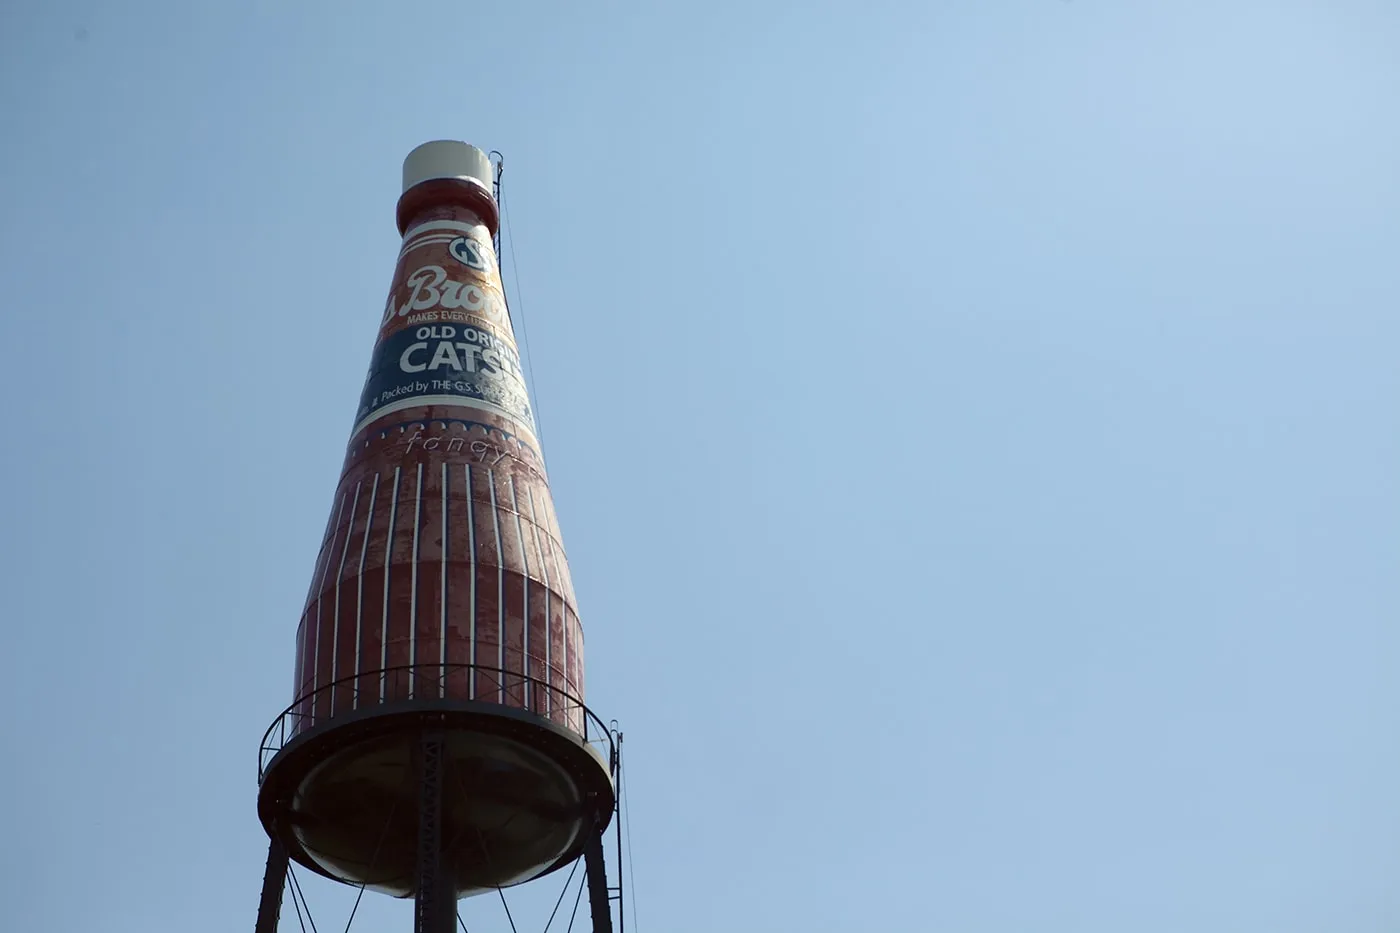 The World's Largest Catsup Bottle, a roadside attraction in Collinsville, Illinois